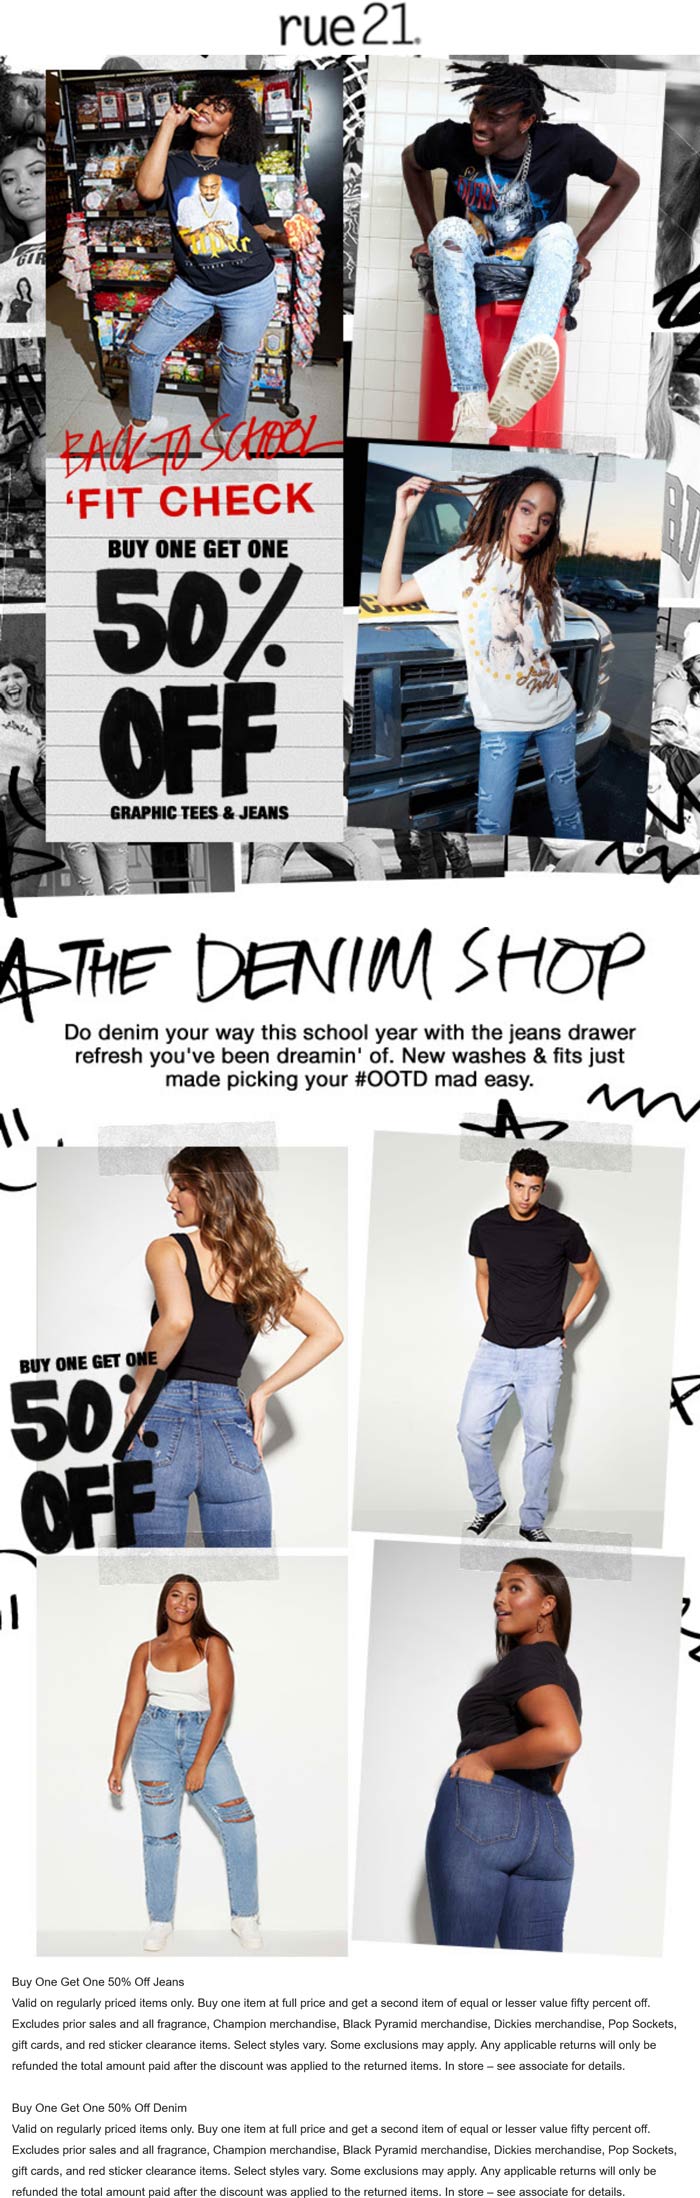 rue21 stores Coupon  Second graphic shirt or denim 50% off at rue21, ditto online #rue21 